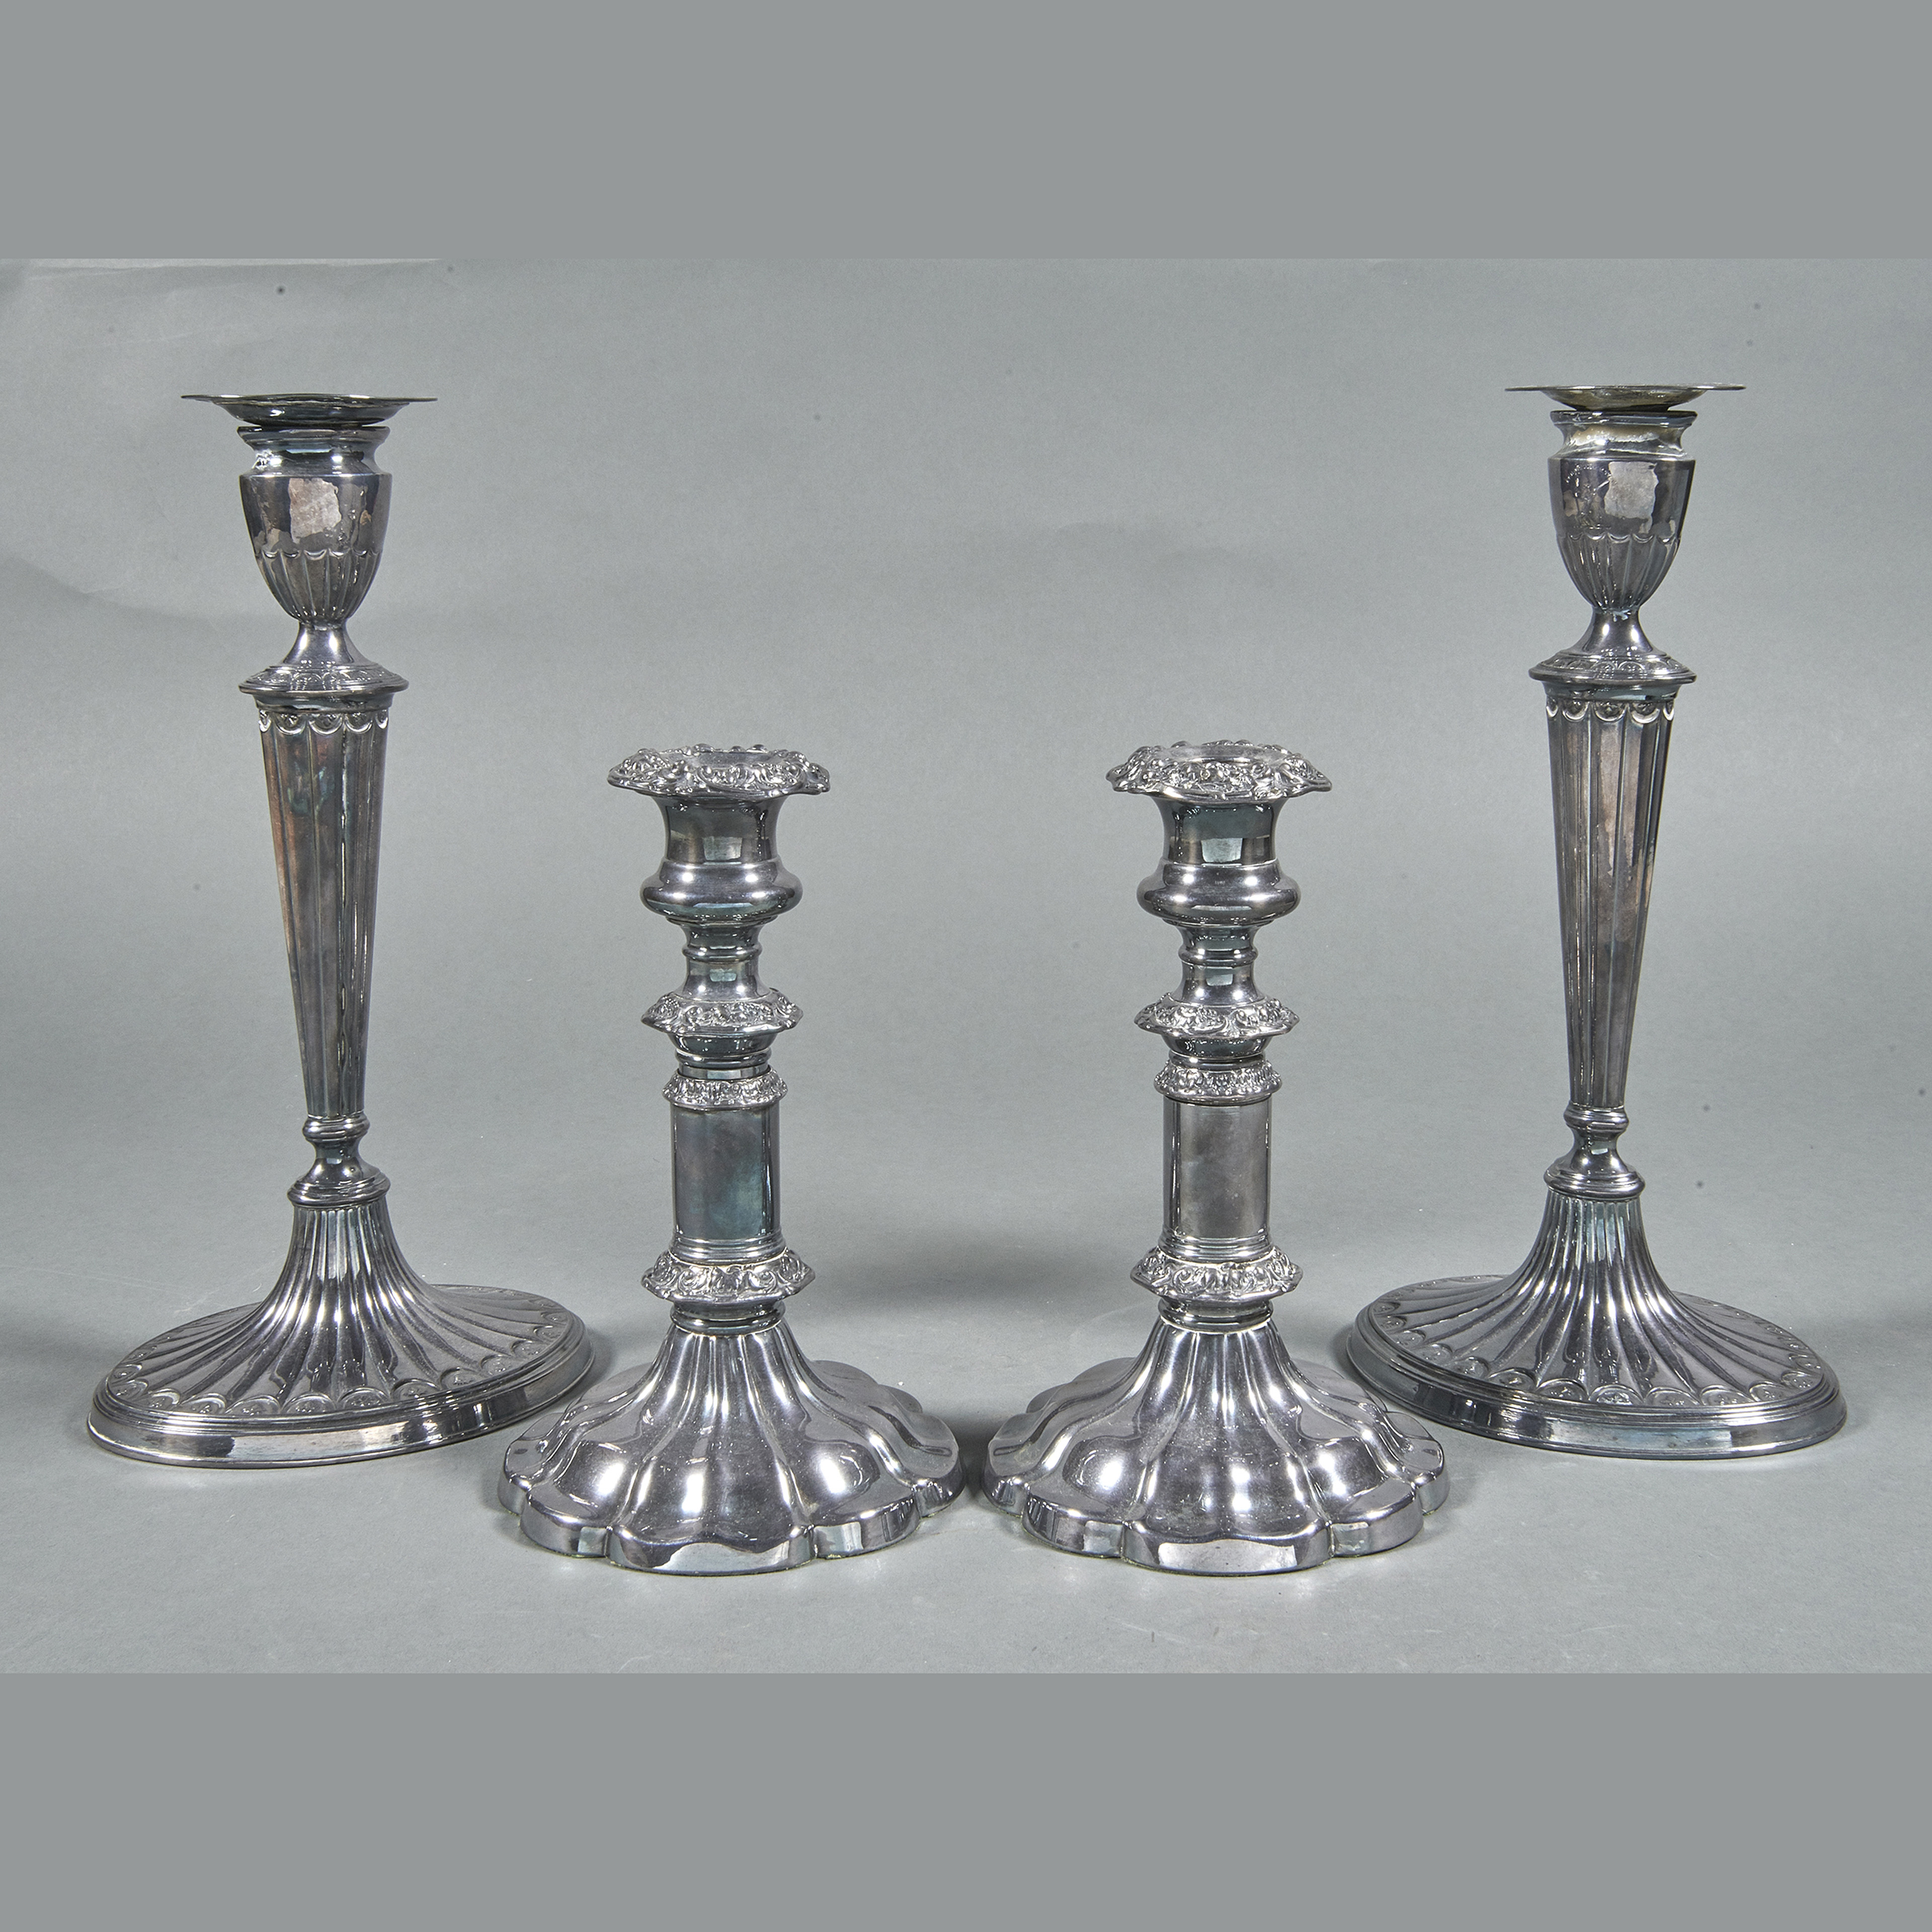 (LOT OF 4) 2 PAIRS OF PLATED CANDLESTICKS